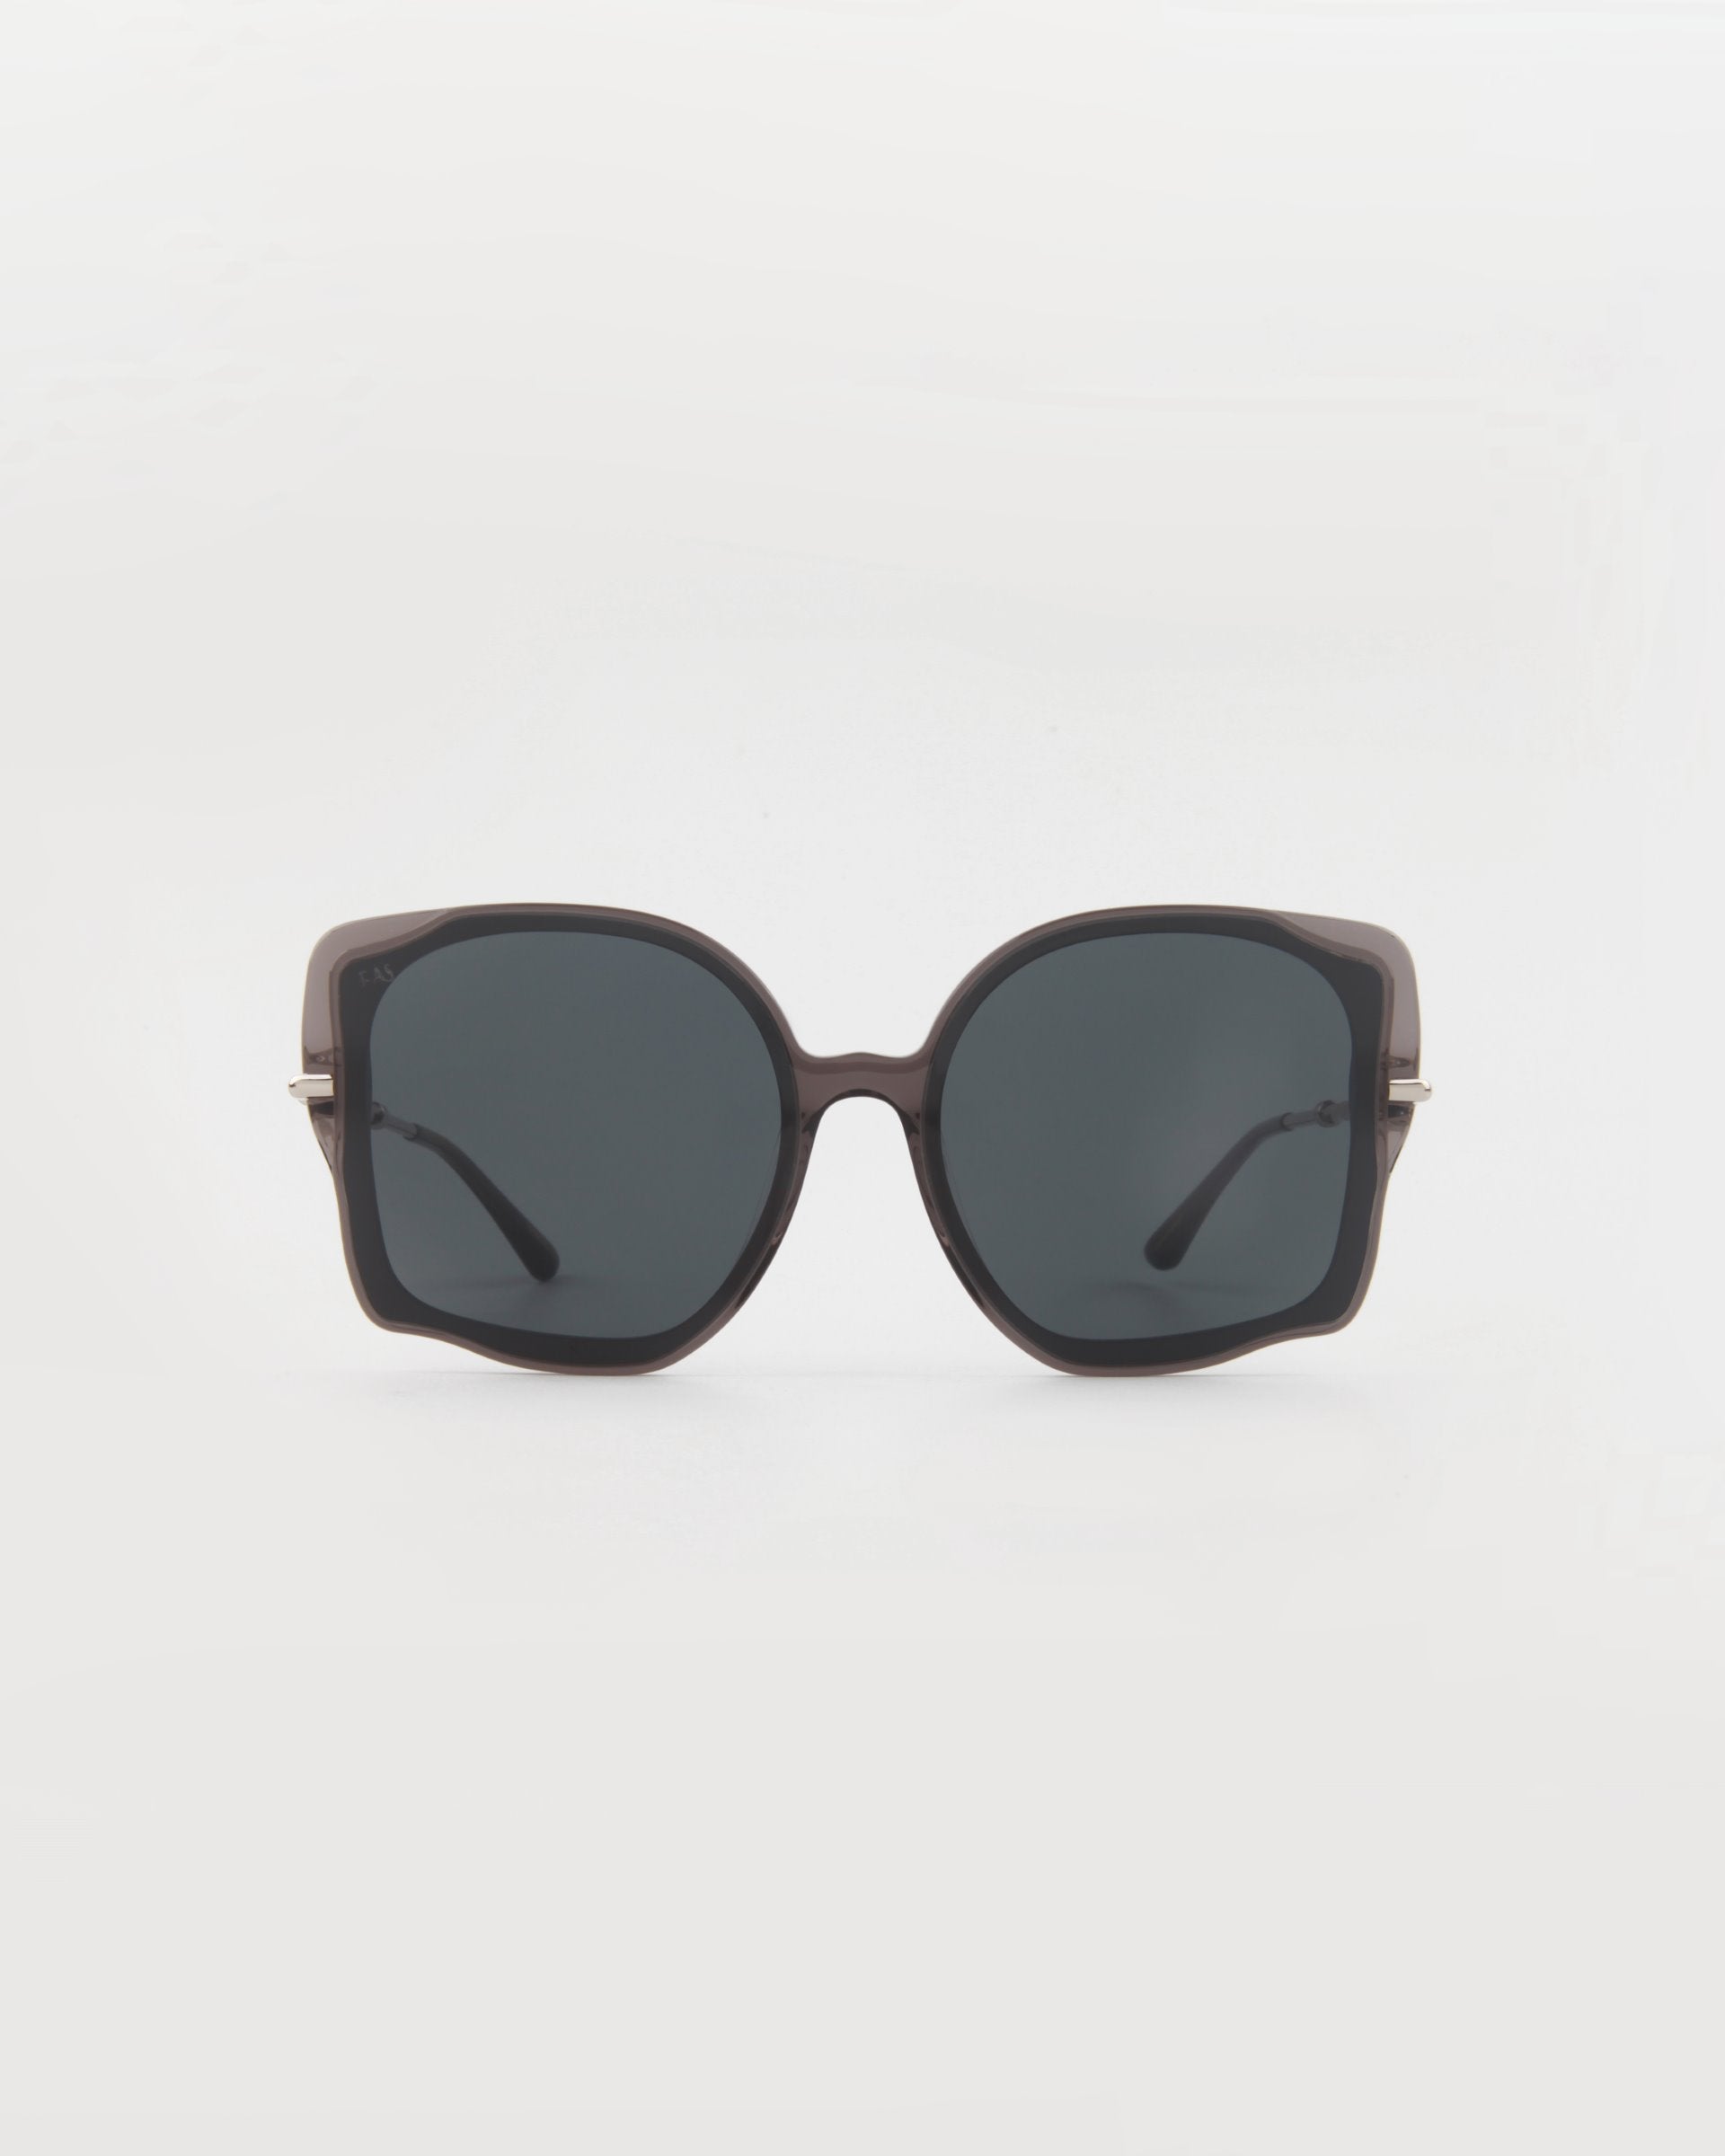 A pair of oversized, handmade acetate sunglasses featuring square-shaped, dark brown frames and dark-tinted lenses with 18-karat gold-plated arms, displayed against a plain white background. This is the Fahrenheit by For Art&#39;s Sake®.